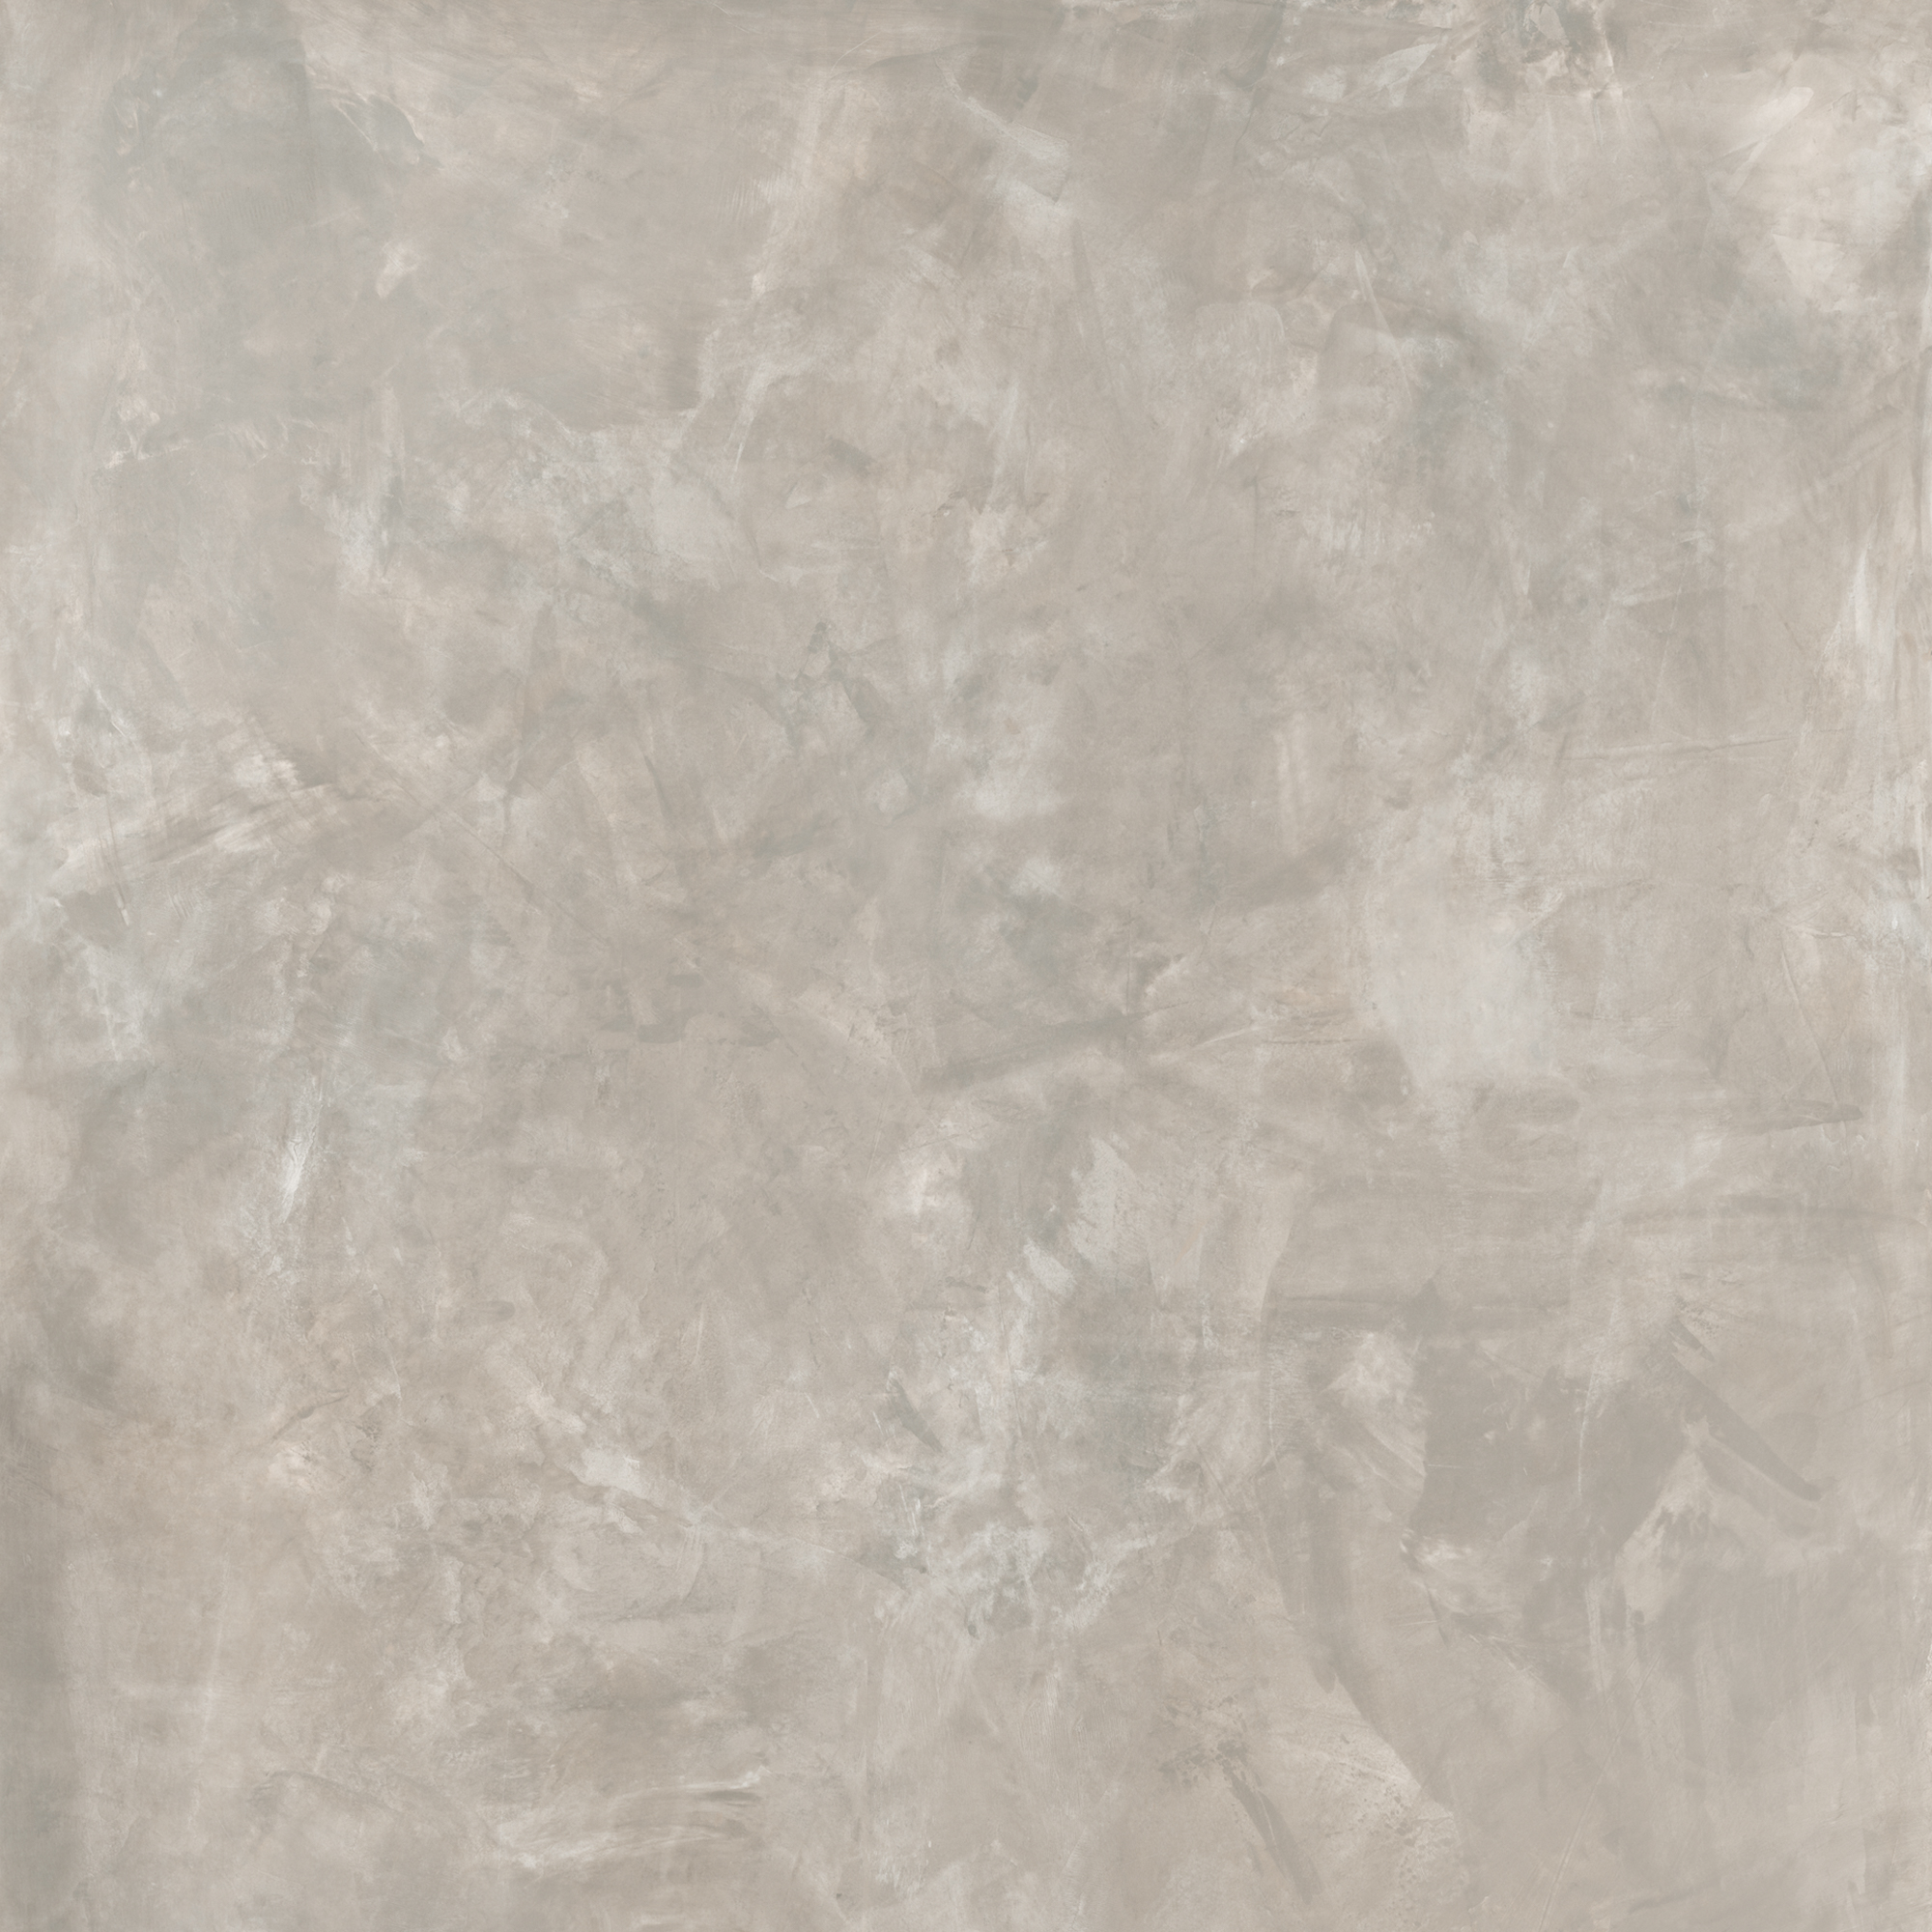 Caesar Join Manor Soft AFCH 120x120cm rectified 9mm